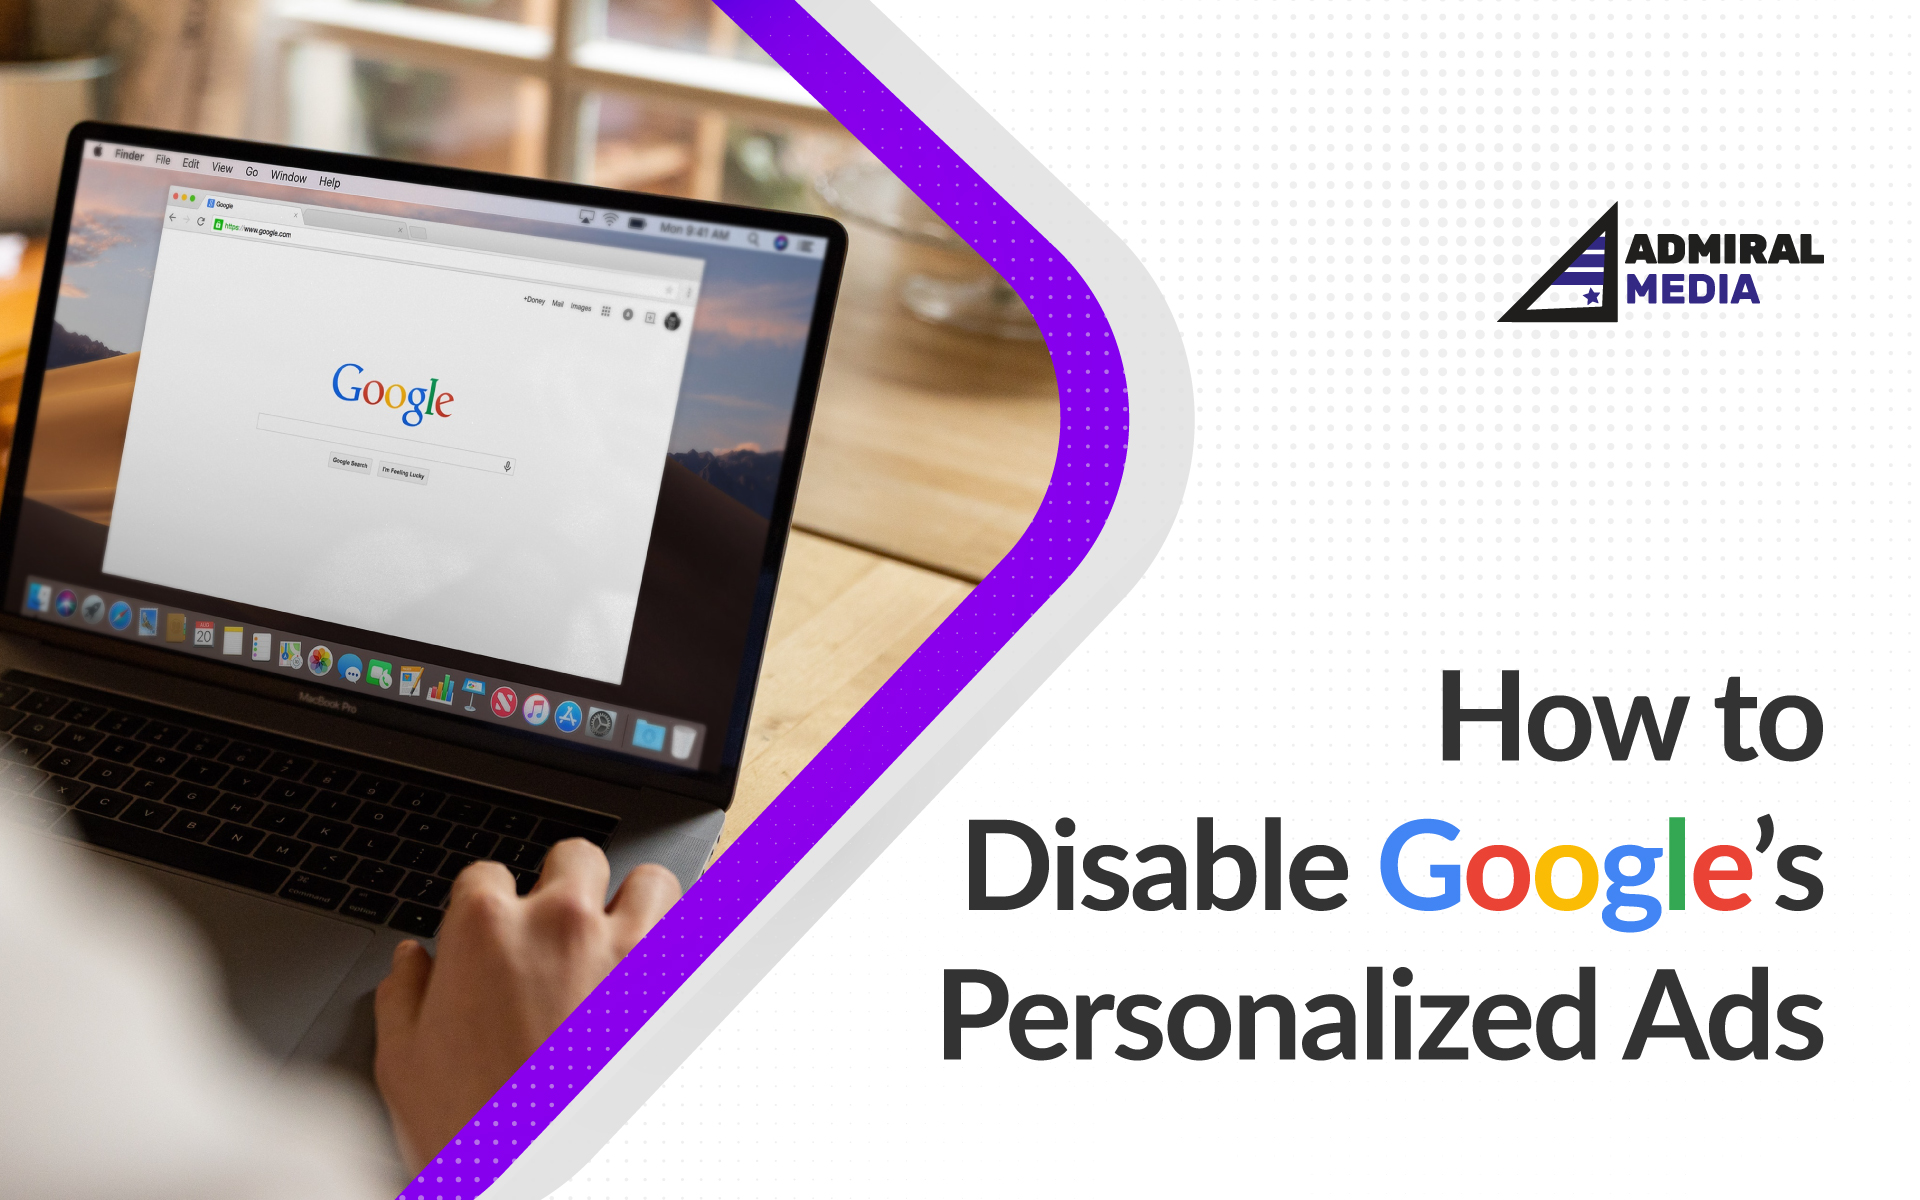 How to disable Google's personalized ads